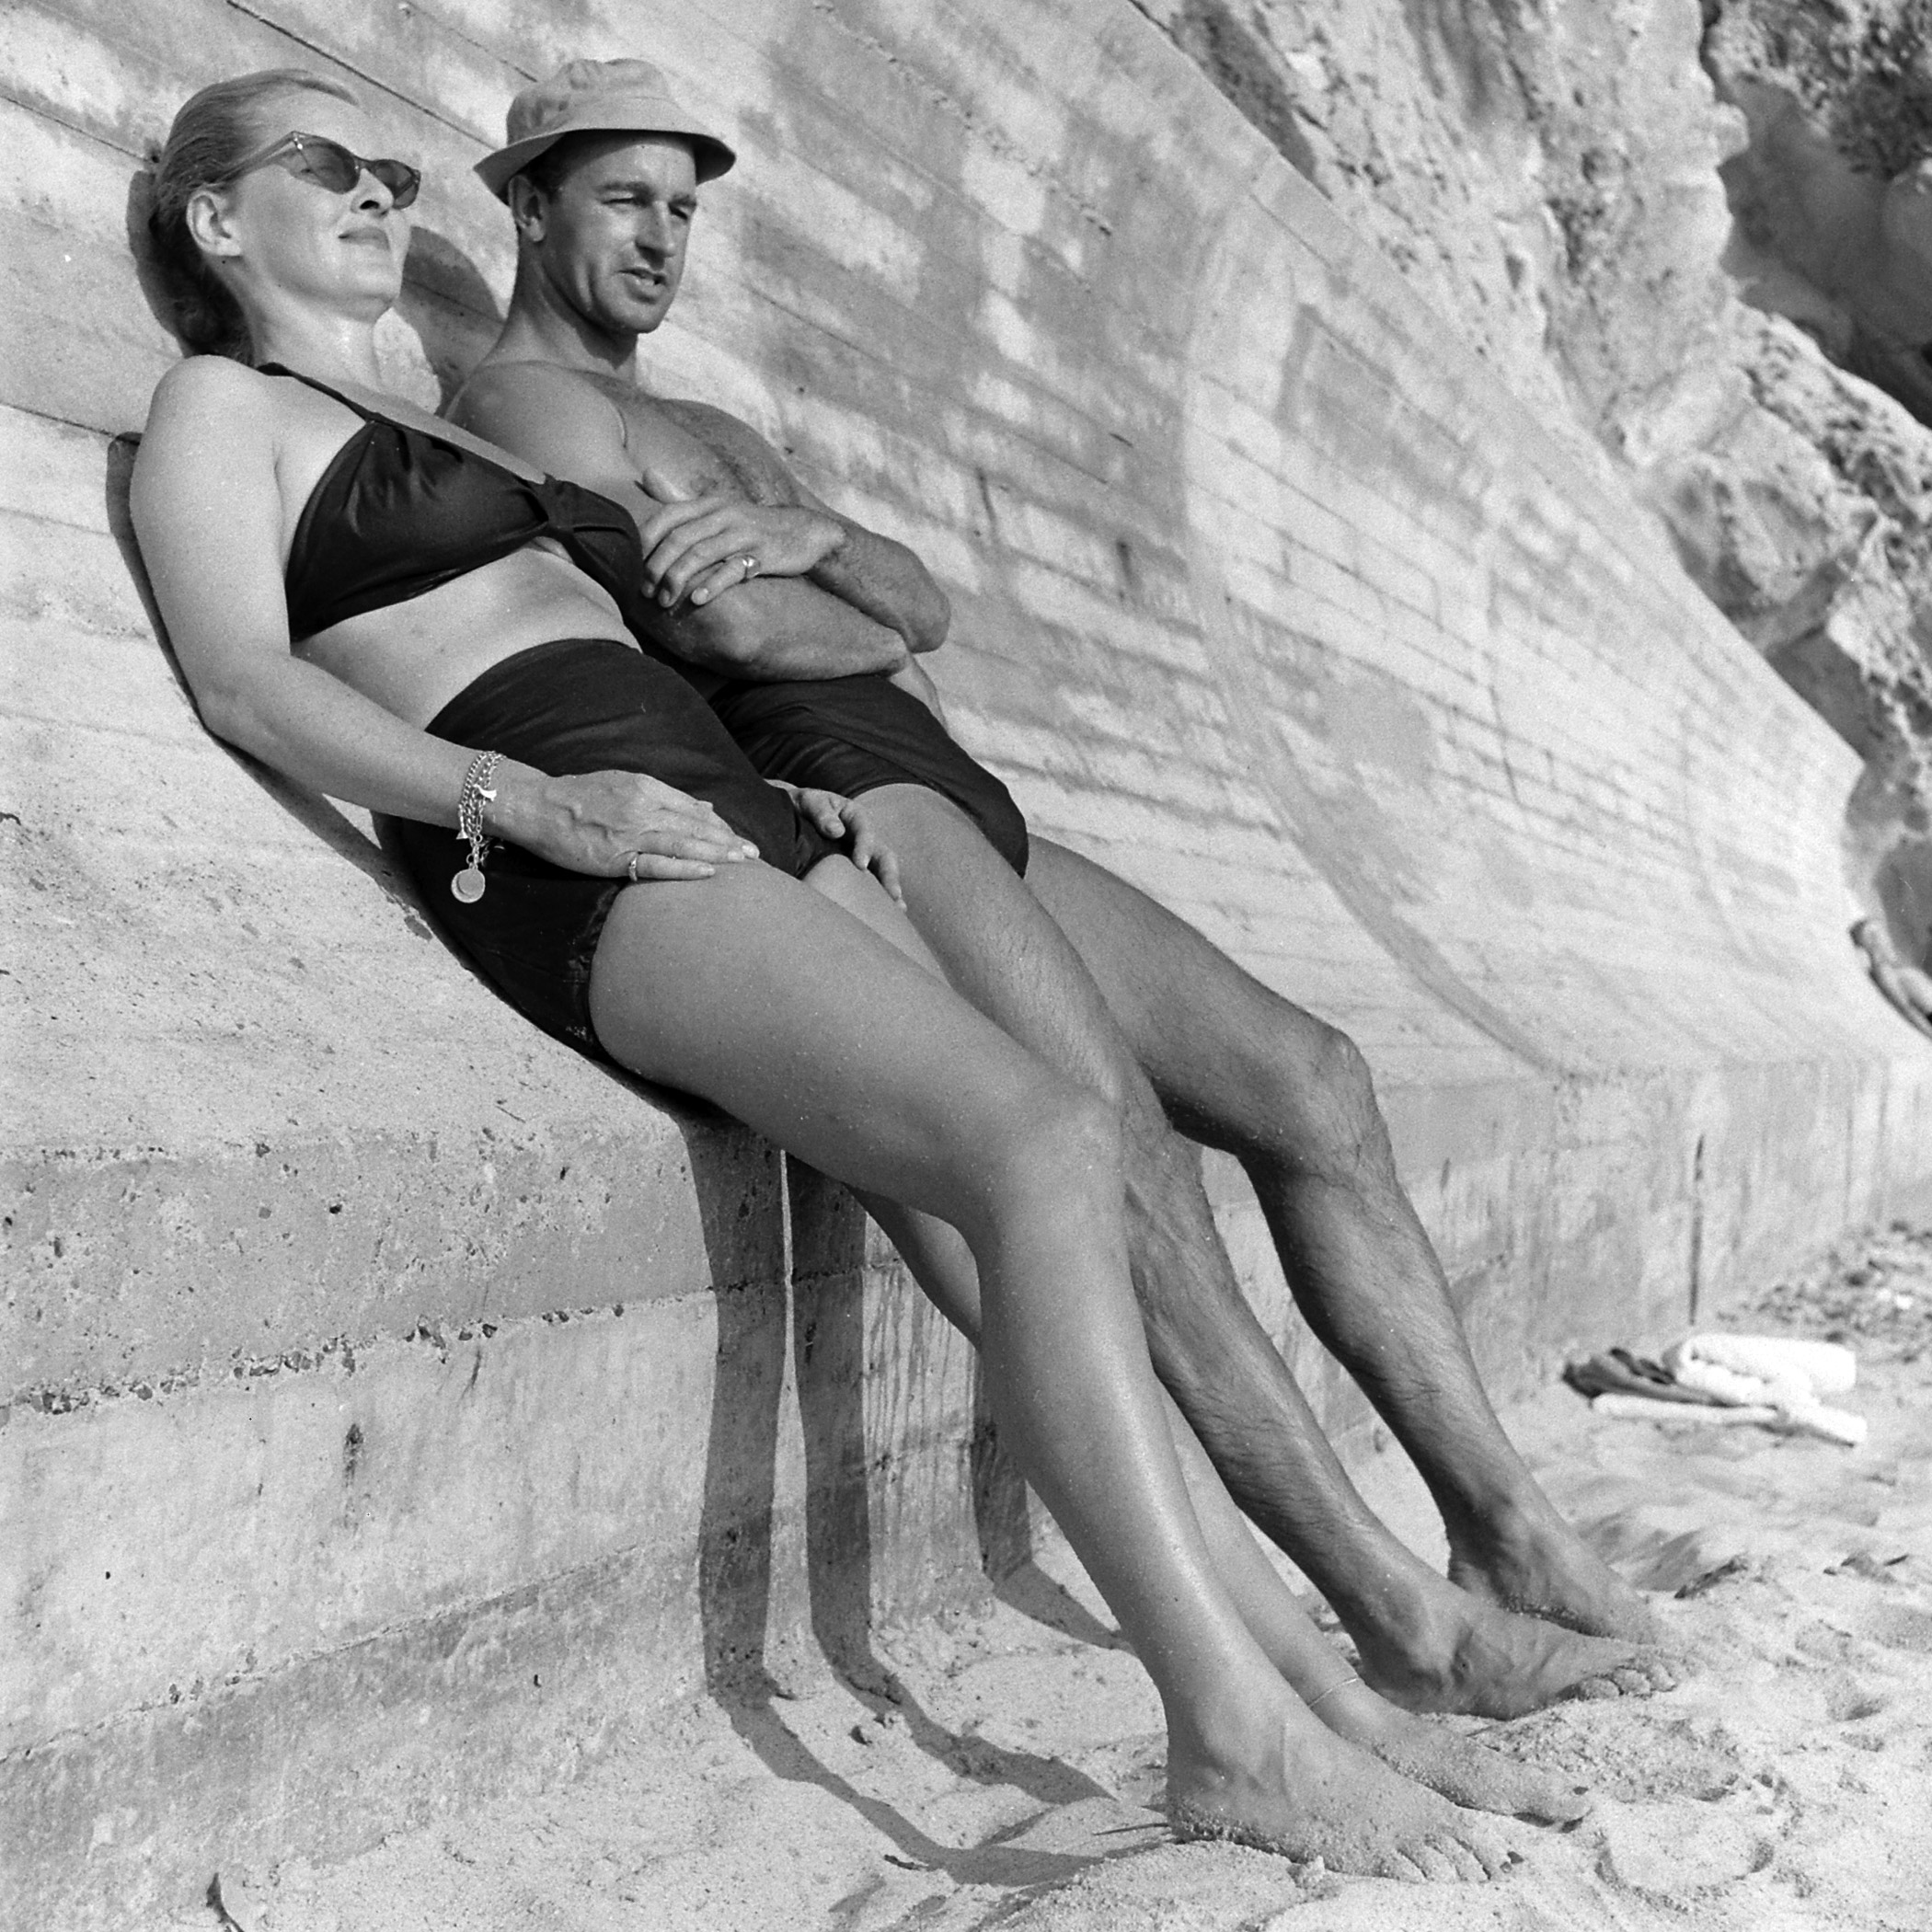 Bette Davis and her third husband William Grant Sherry at the beach in California, 1947.